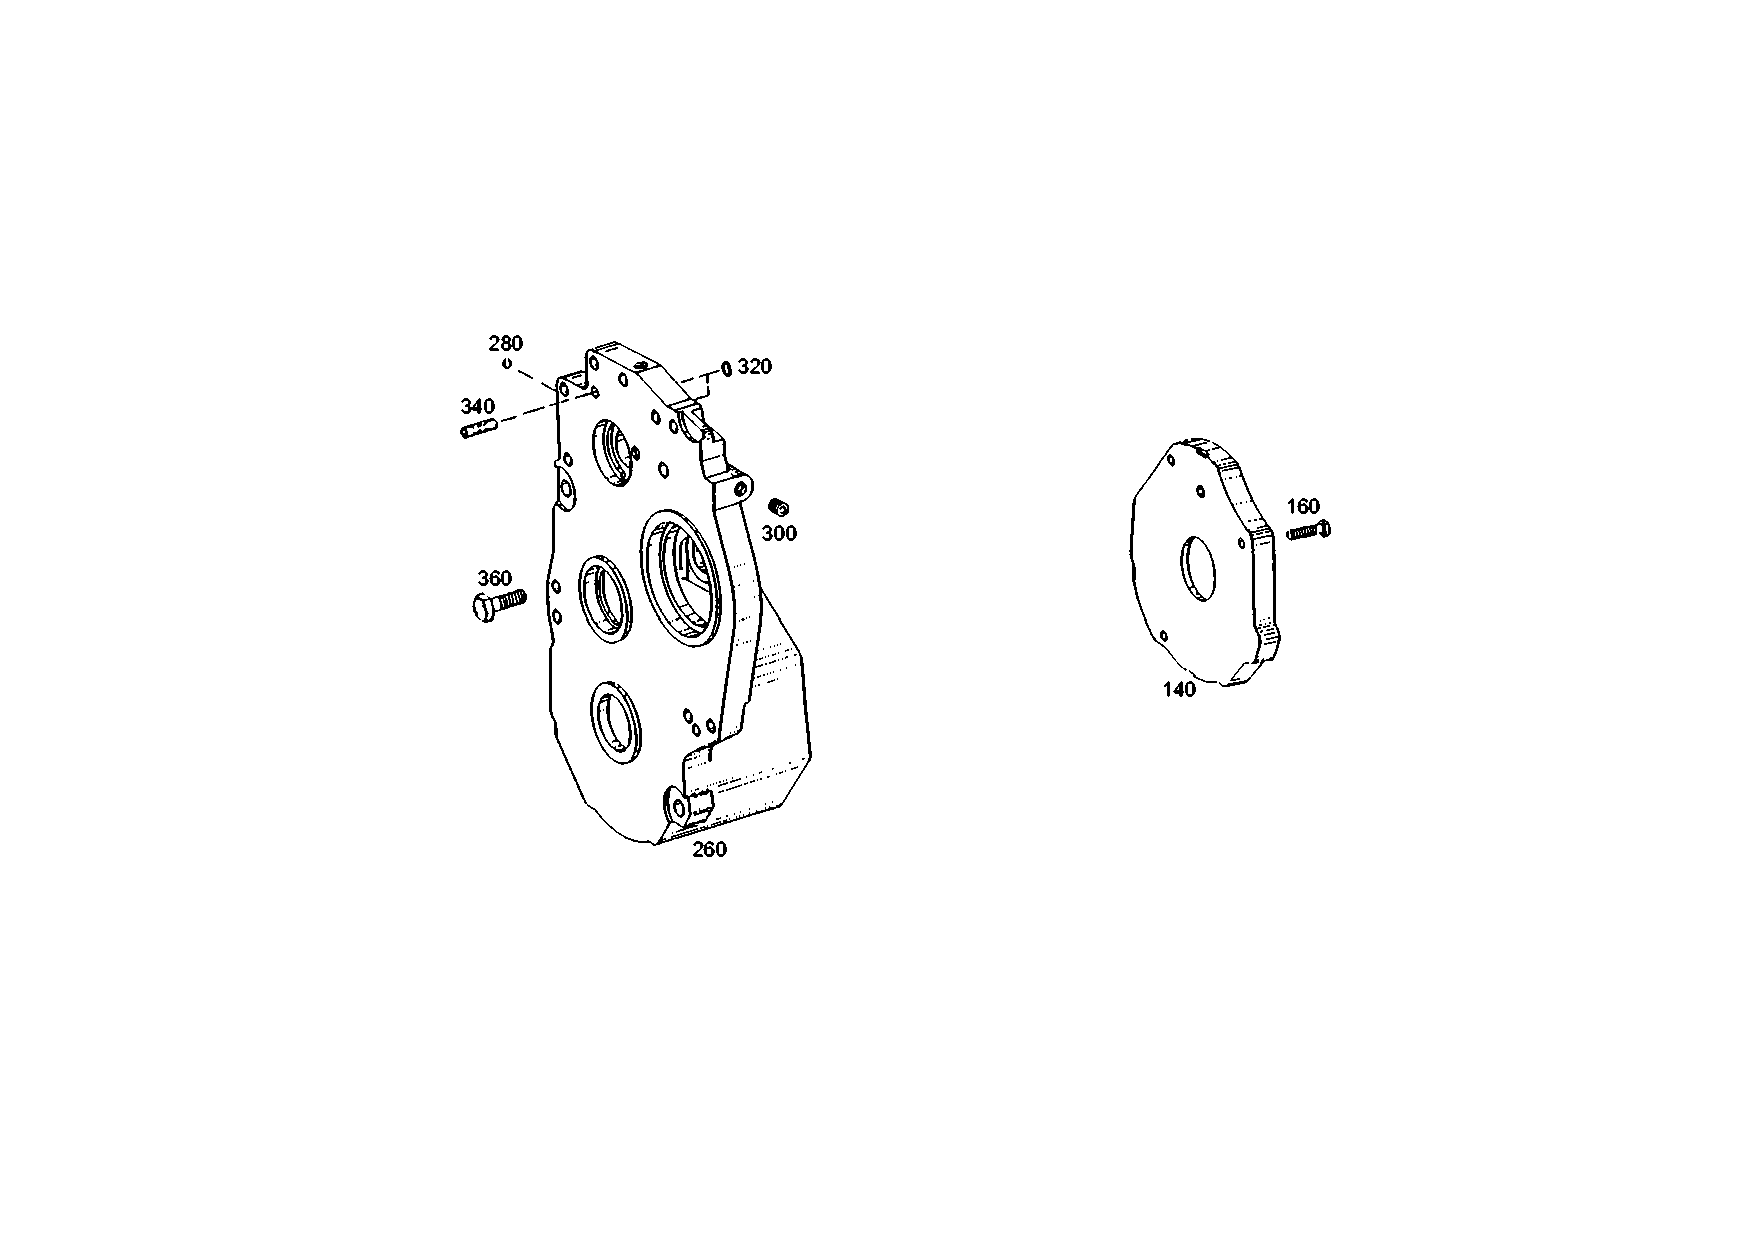 drawing for AGCO X412.827.800.000 - SET SCREW (figure 4)